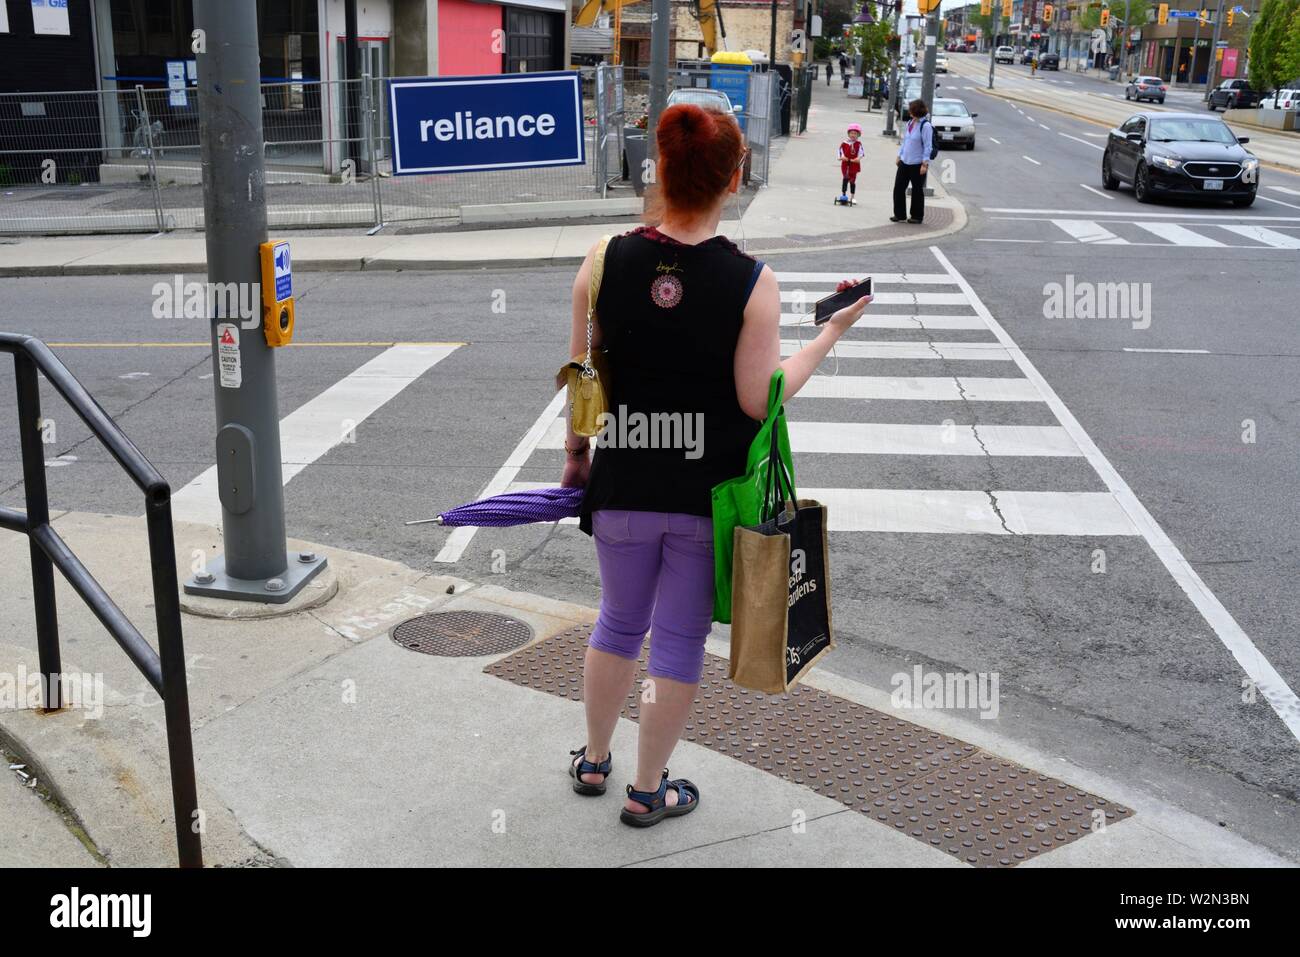 A woman in purple pants with a green handbag waits to cross an intersection and a sign spelling ''reliance'', Toronto, Ontario, Canada. Stock Photo